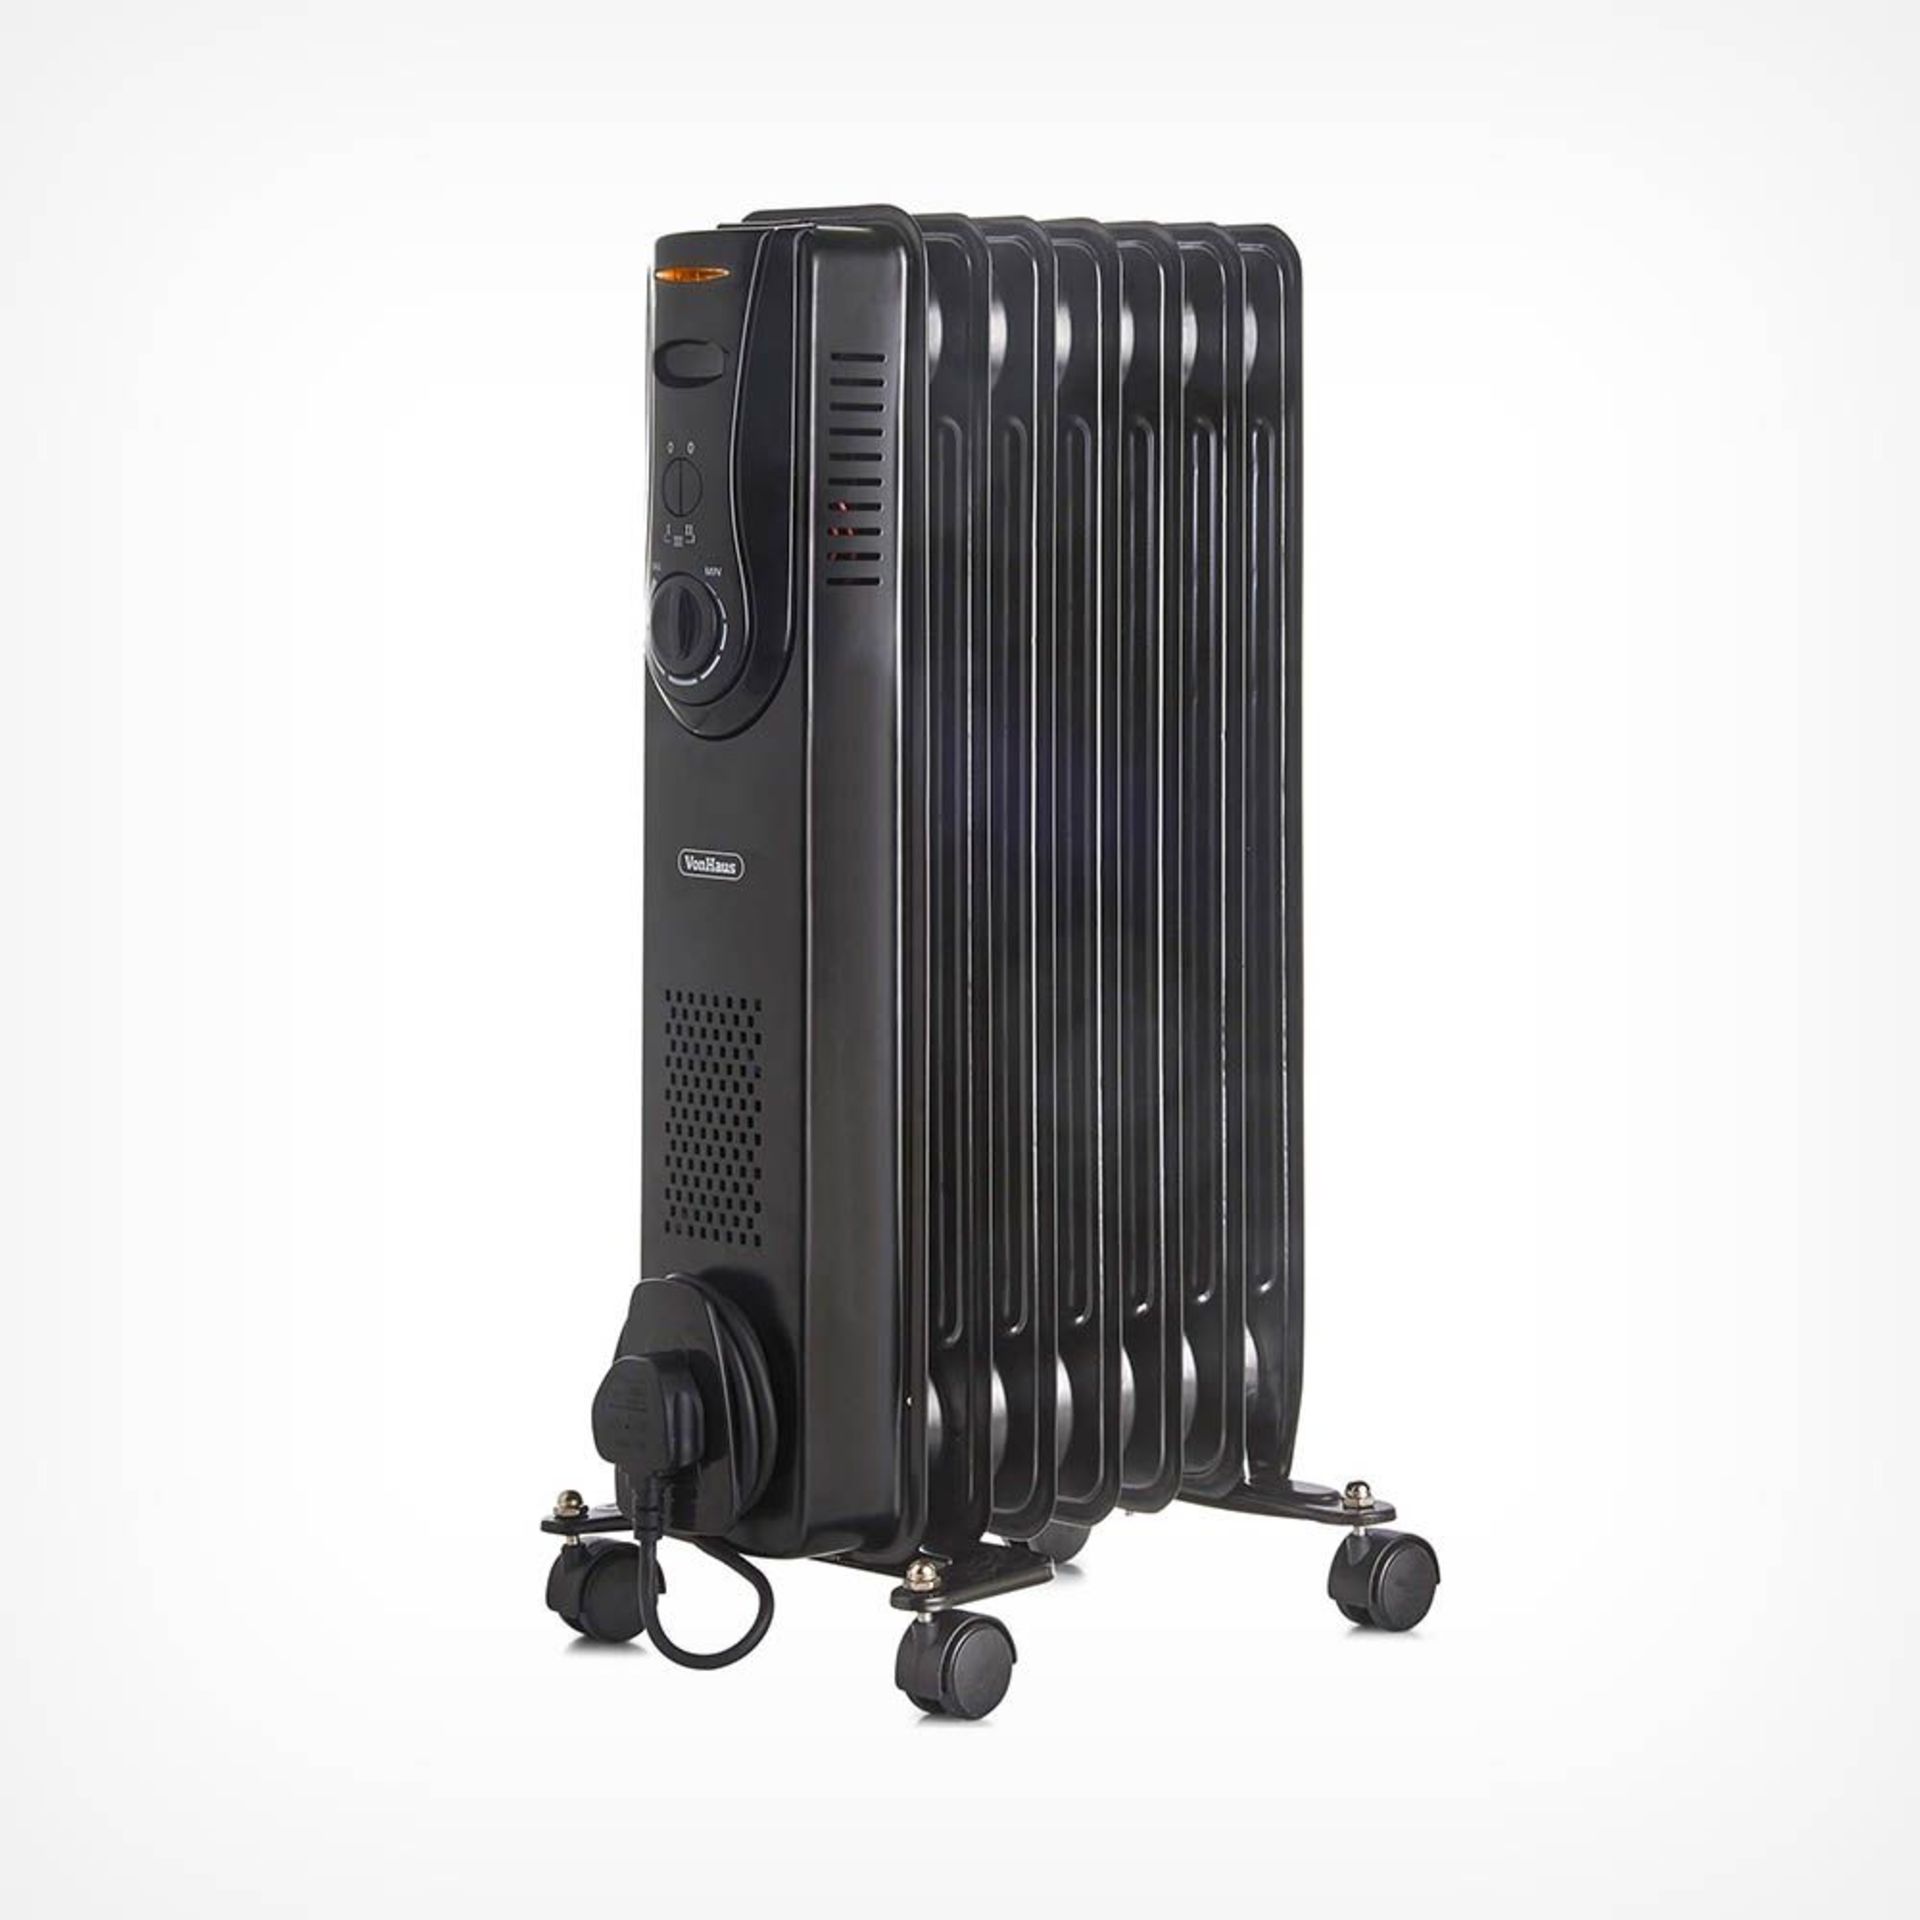 (H132) 7 Fin 1500W Oil Filled Radiator - Black Powerful 1500W radiator with 7 oil-filled fins ...( - Image 2 of 4